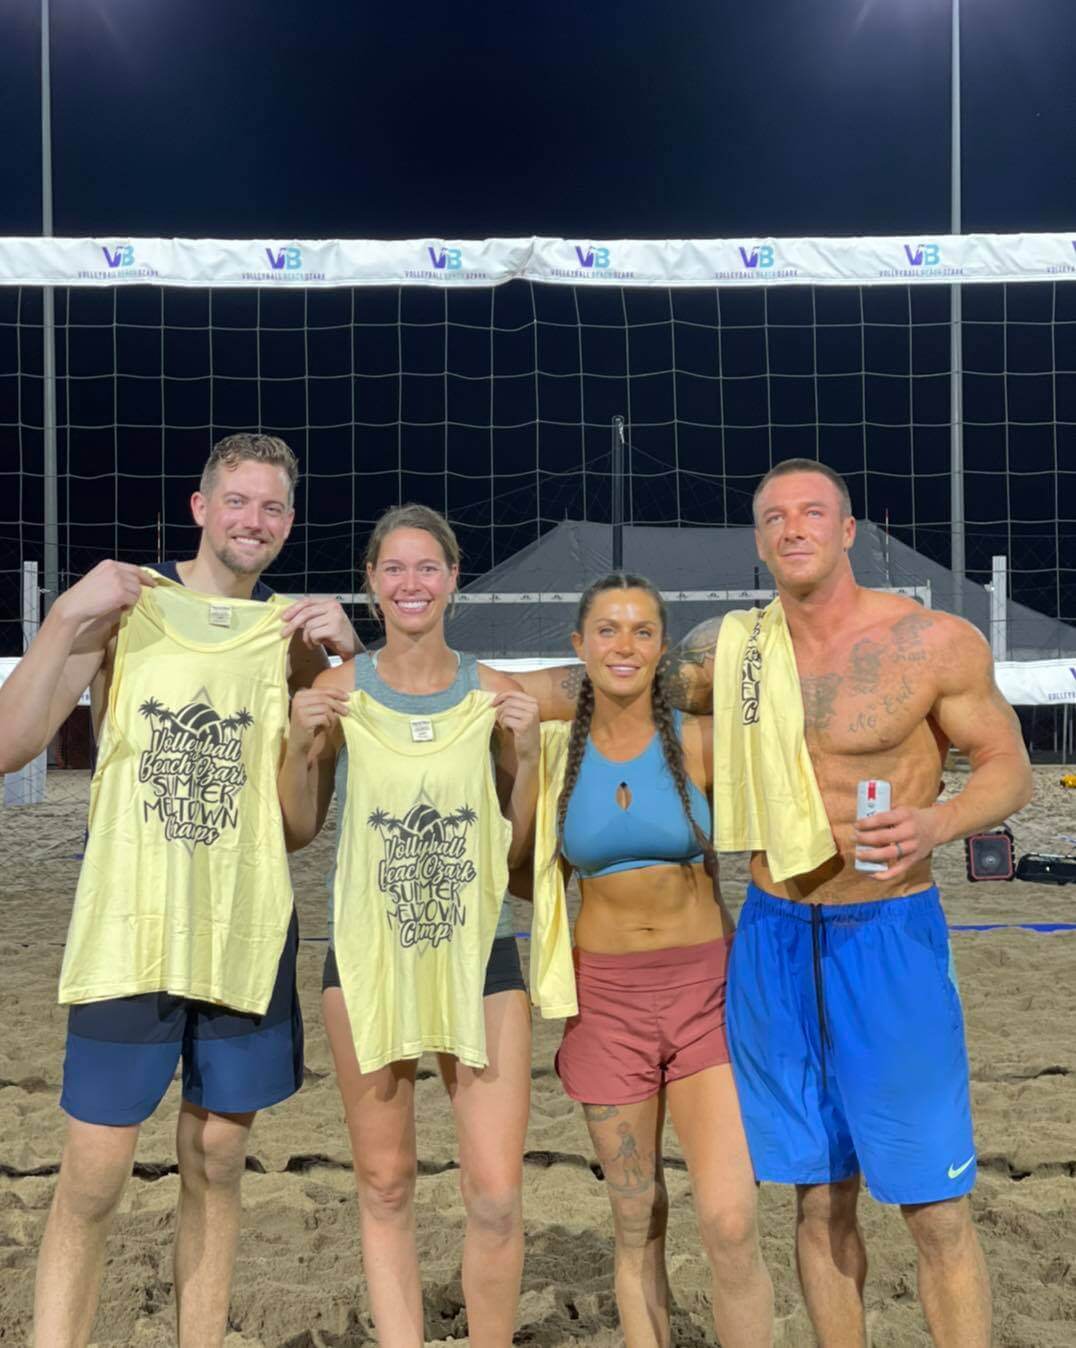 What to Wear When Playing Sand Volleyball at Volleyball Beach Ozark